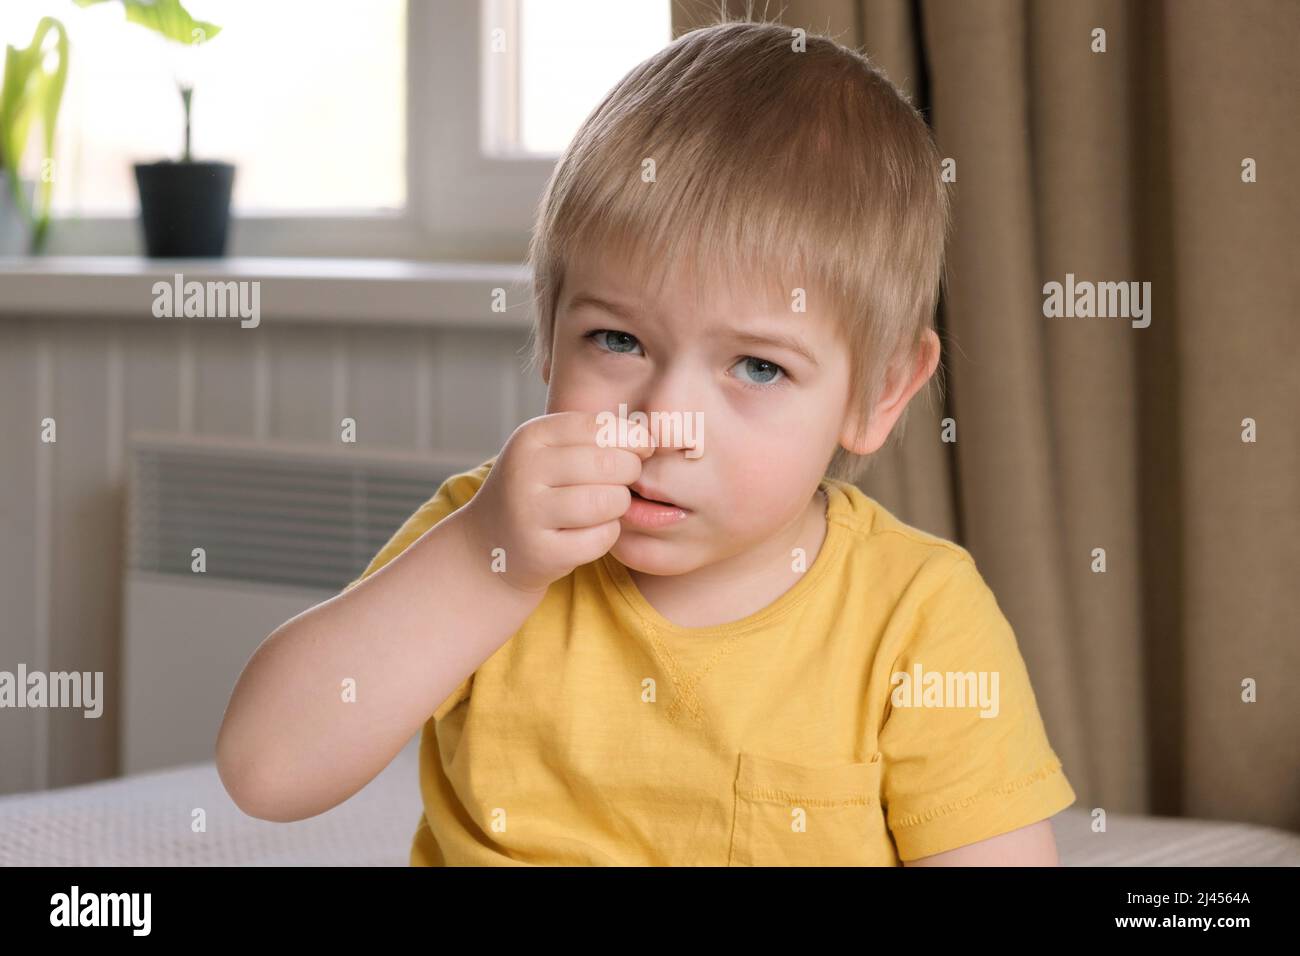 Child boy with blonde hair baby with finger in his nose. Portrait 3 years old kid picking nose. Early age children education development. Authentic Stock Photo